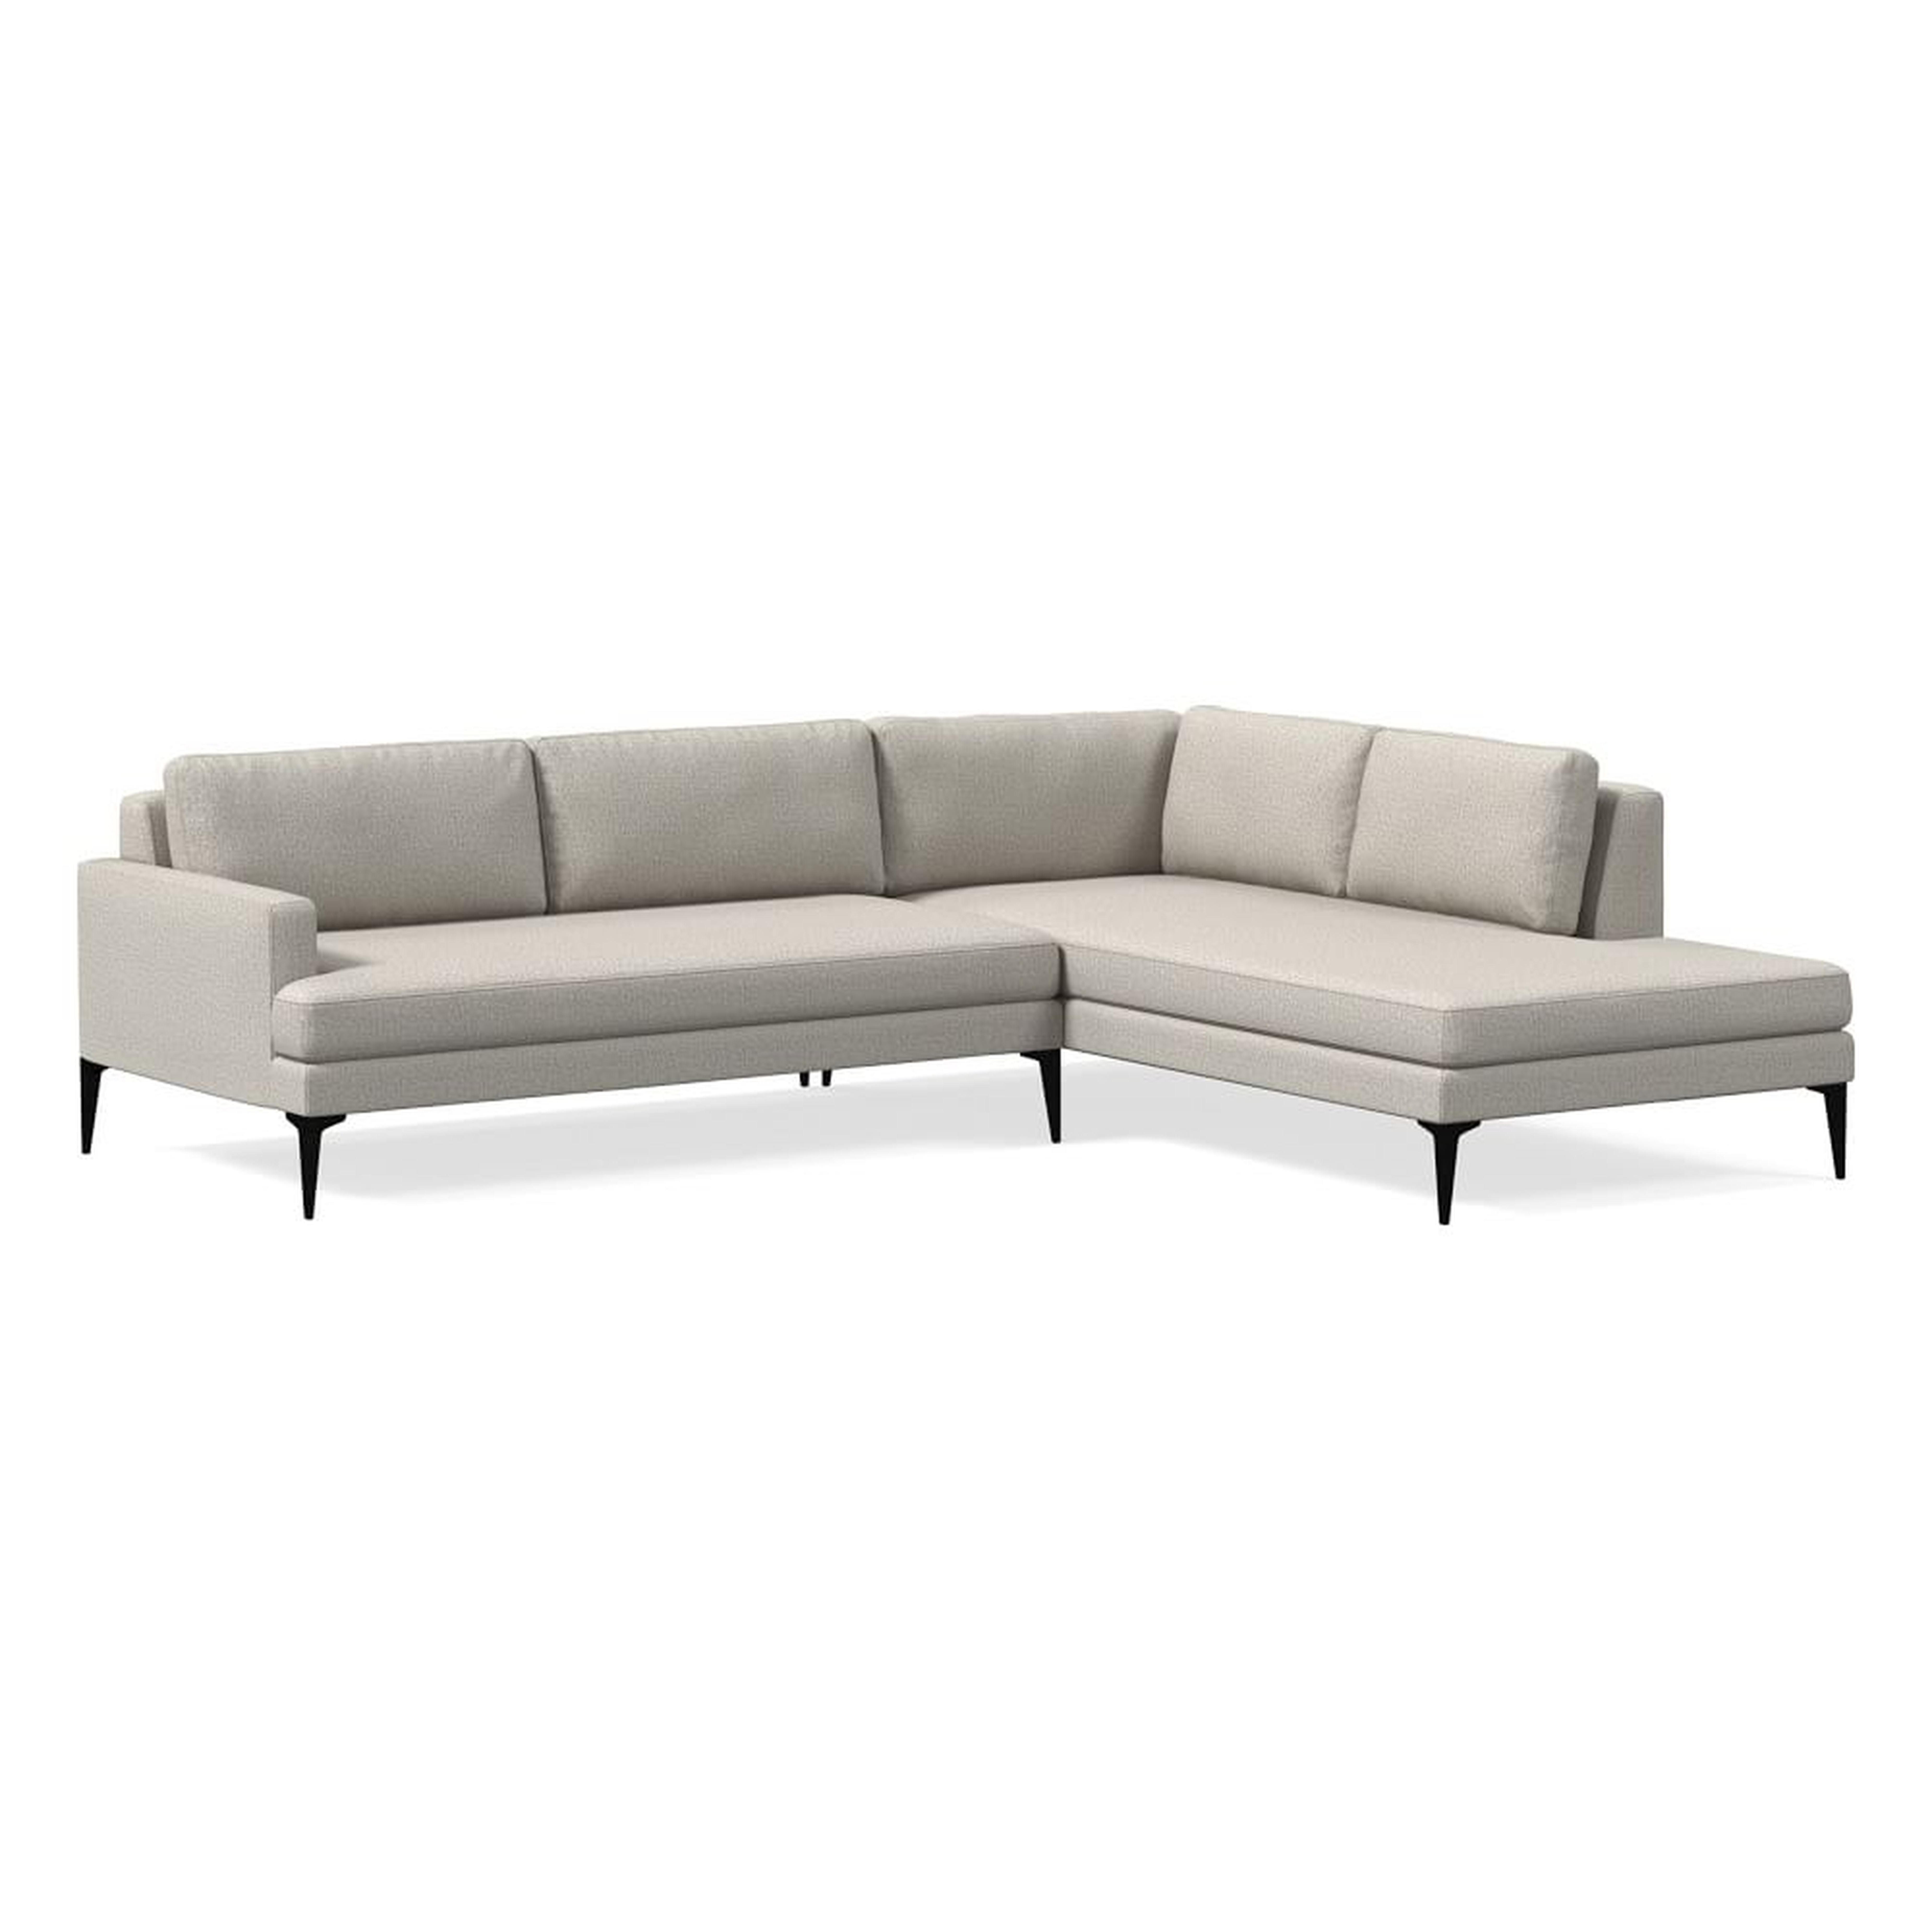 Andes 105" Right Multi Seat 2-Piece Bumper Chaise Sectional, Standard Depth, Twill, Dove, Dark Pewter - West Elm